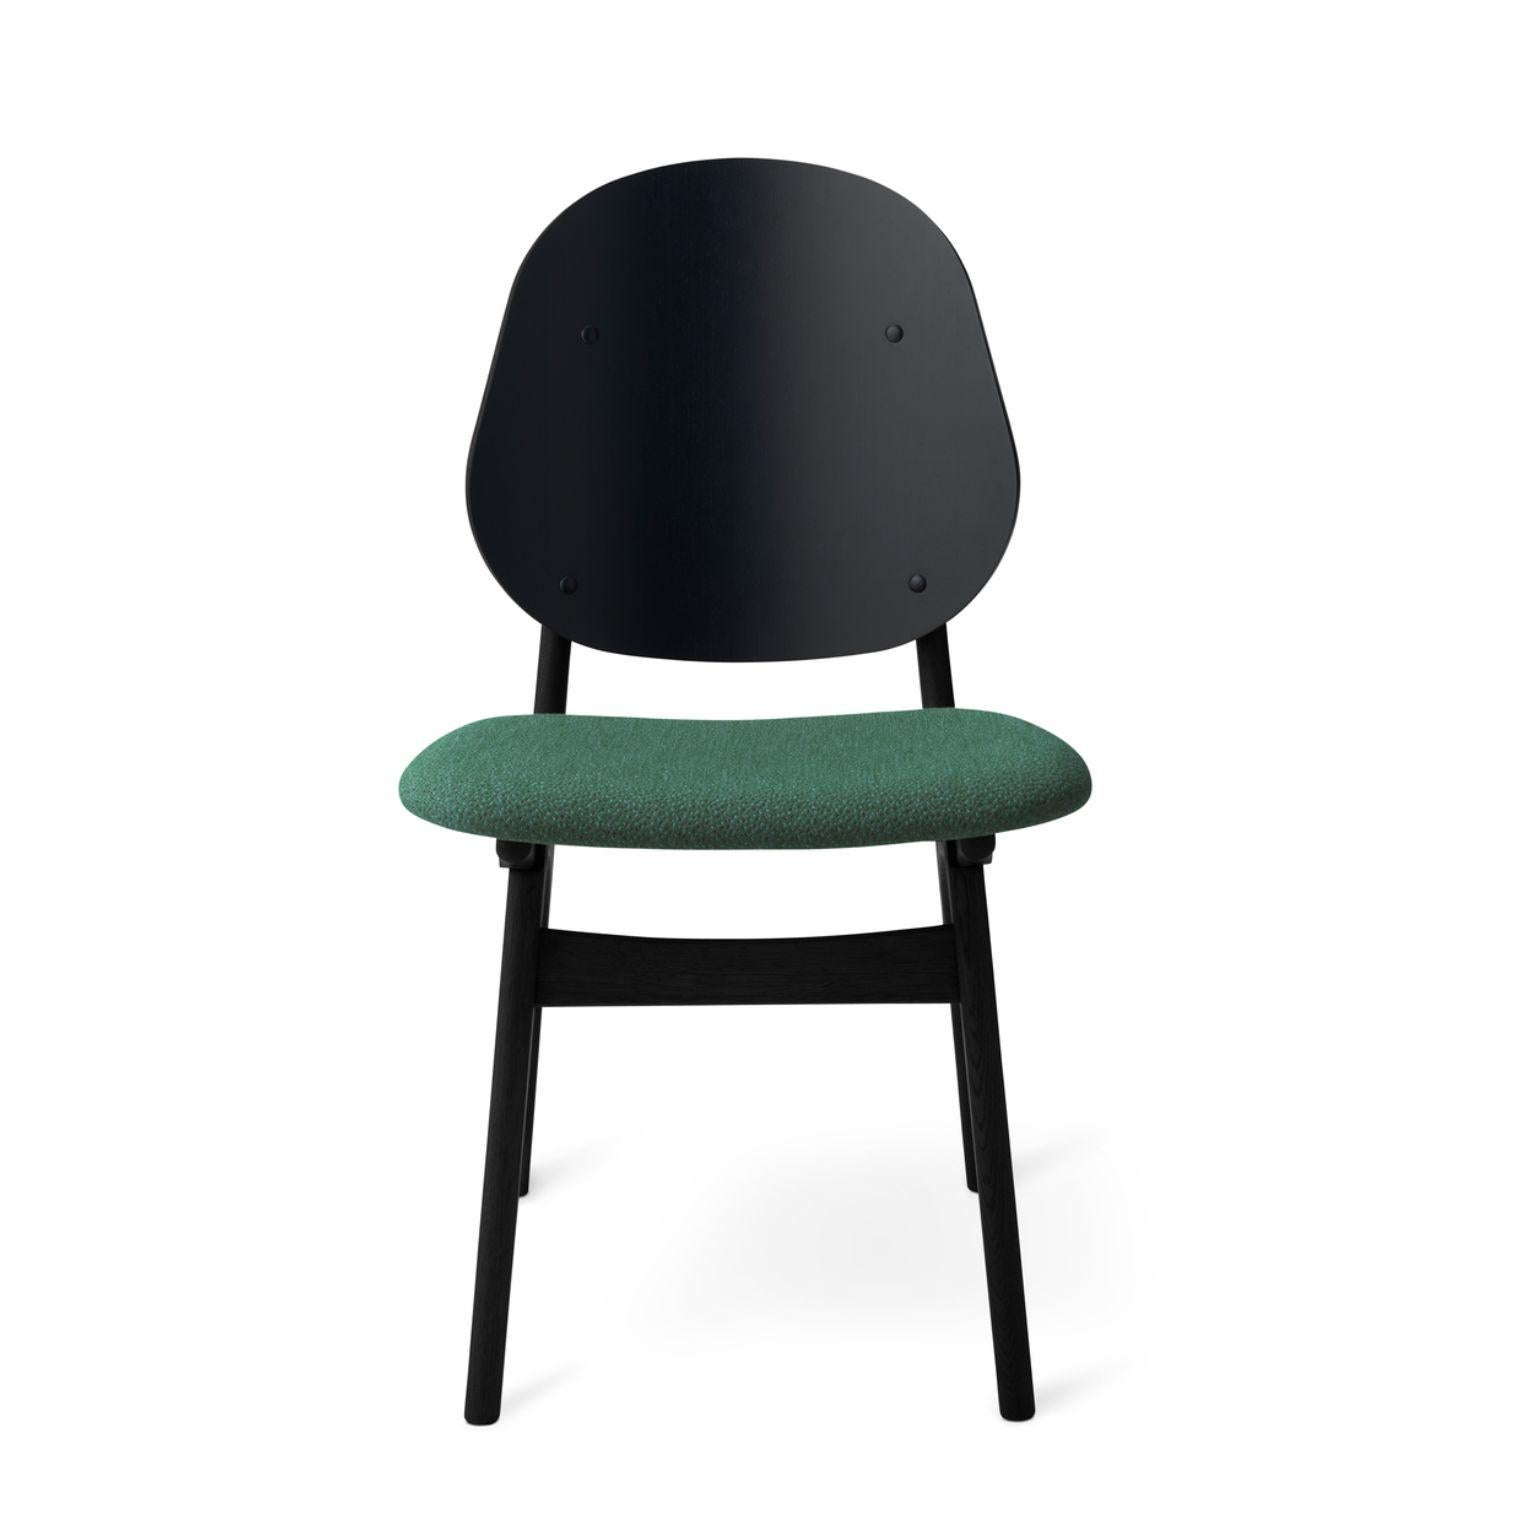 Noble chair Black Lacquered Beech Dark Cyan by Warm Nordic
Dimensions: D55 x W47 x H 85 cm
Material: Black lacquered solid beech, Veneer seat and back, Textile upholstery.
Weight: 7.5 kg
Also available in different colors and finishes. 

An